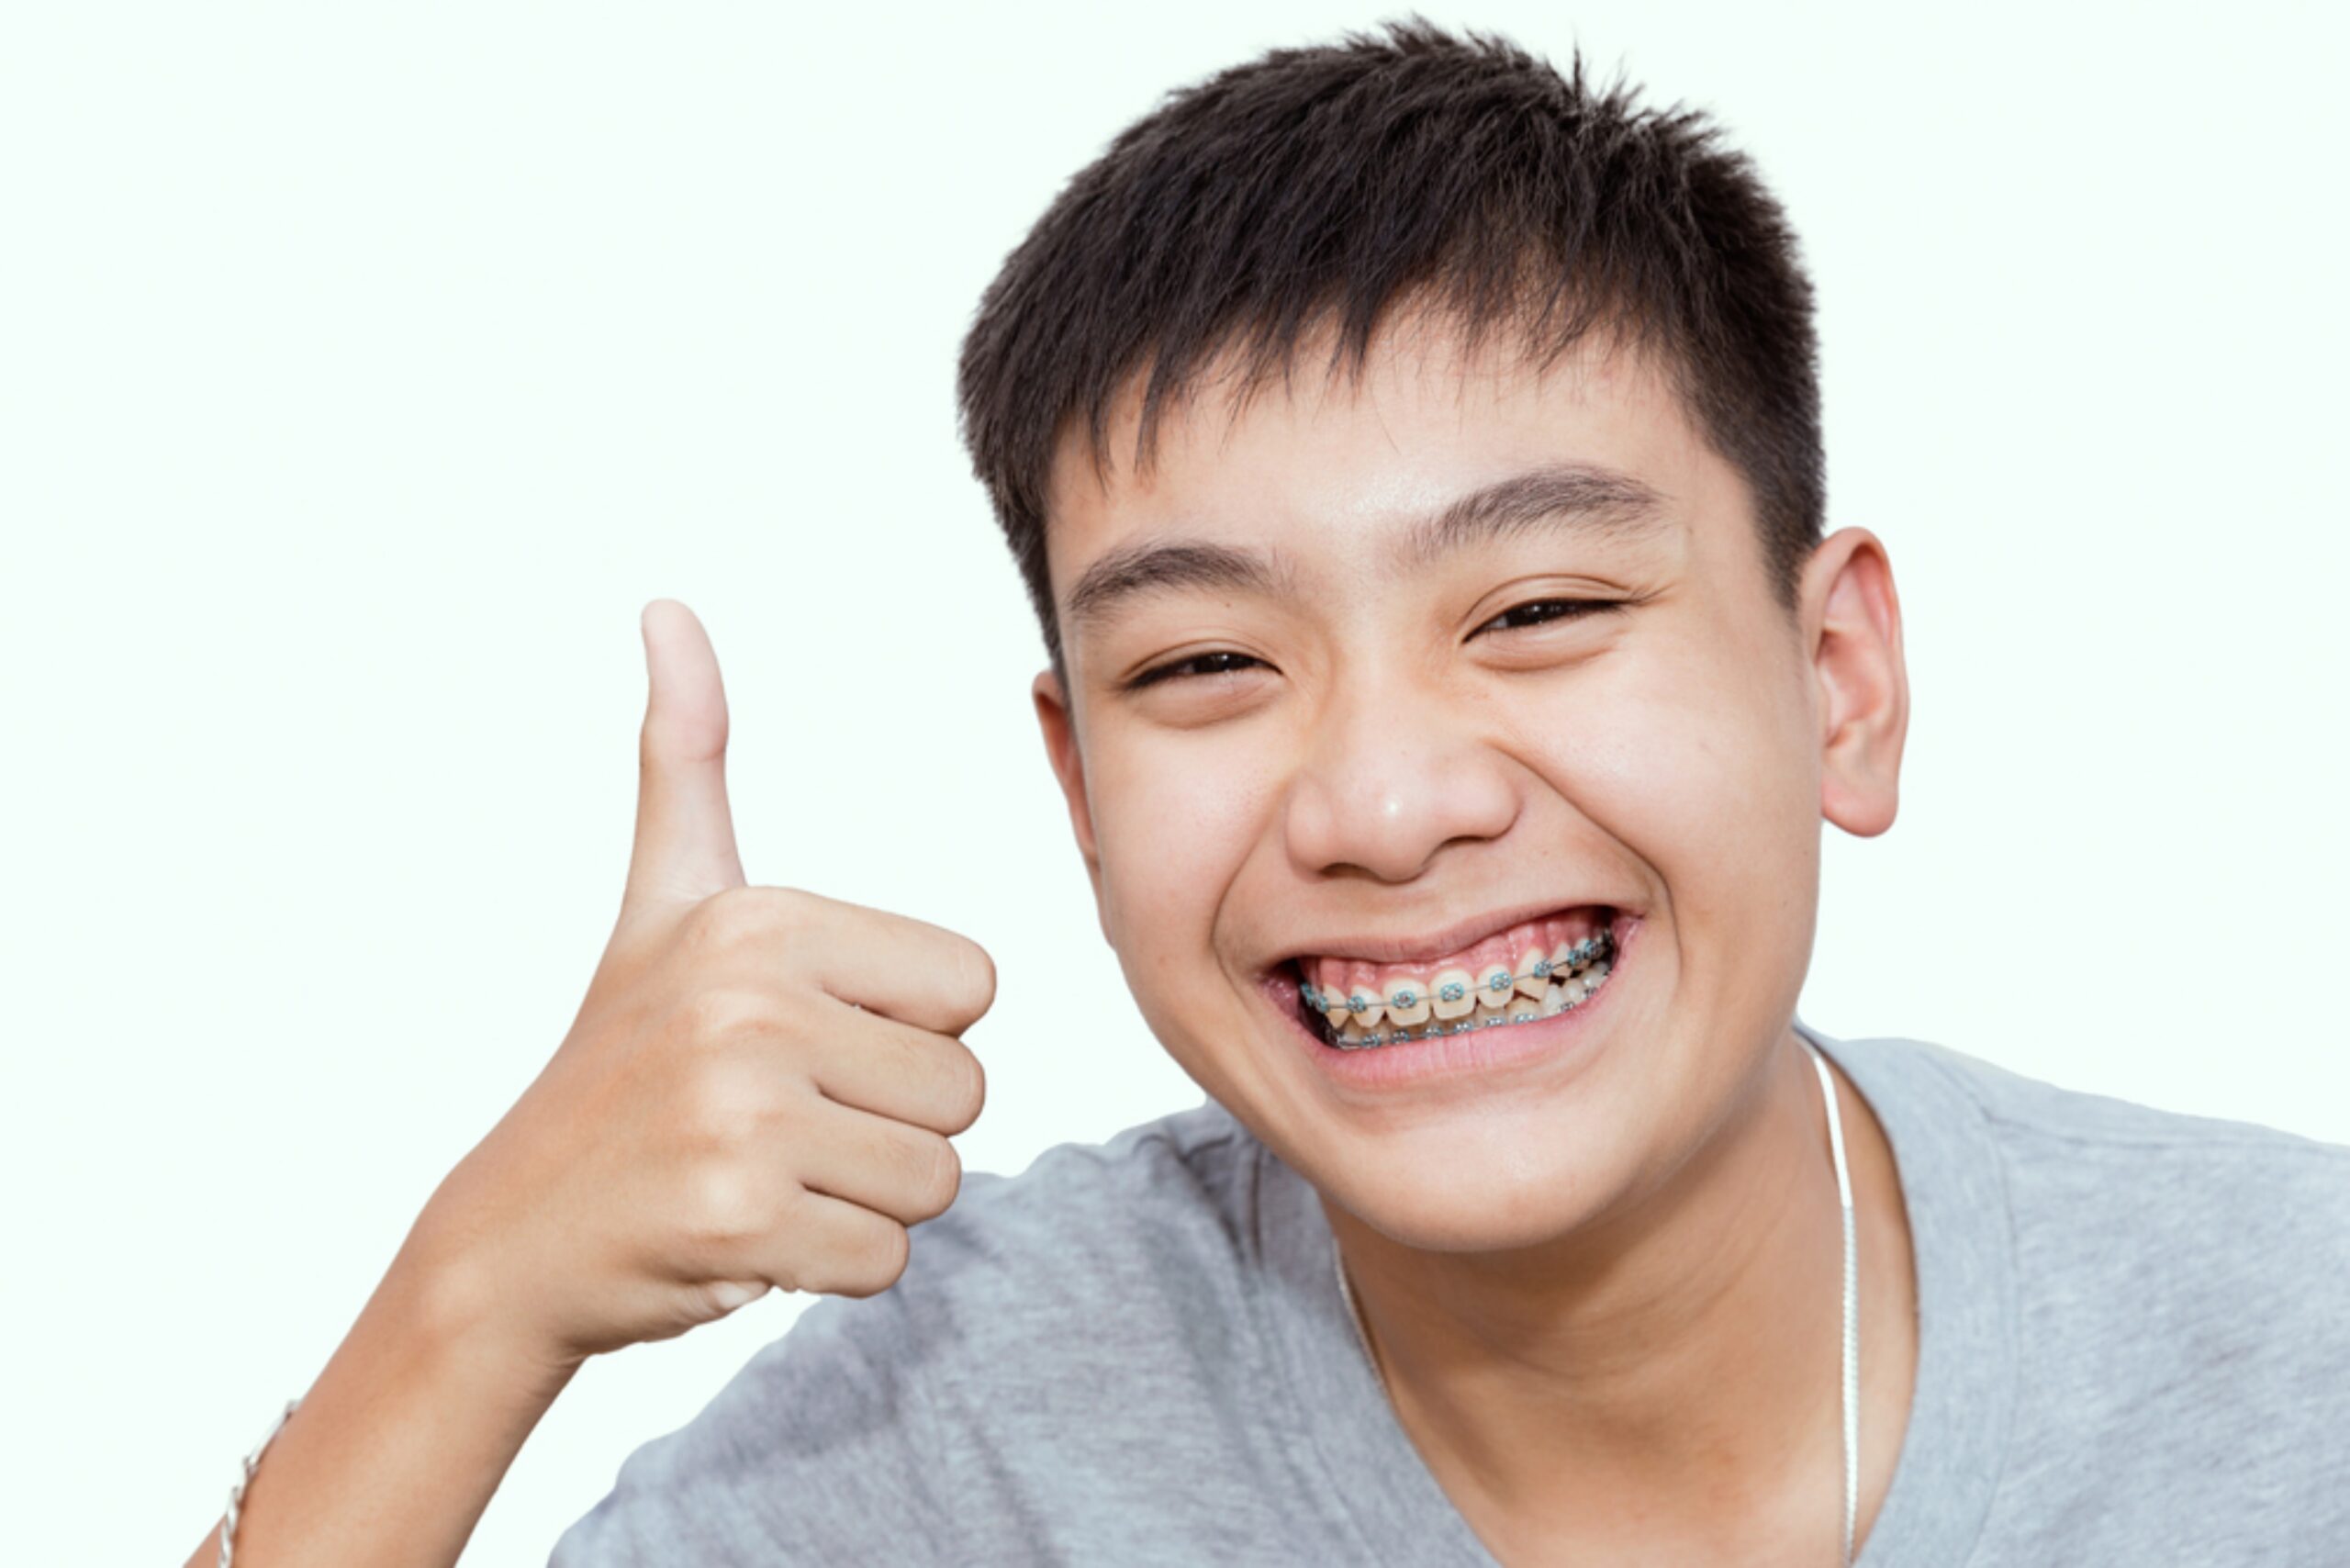 https://chancellordental.com/wp-content/uploads/2023/02/are-traditional-braces-better-scaled.jpg